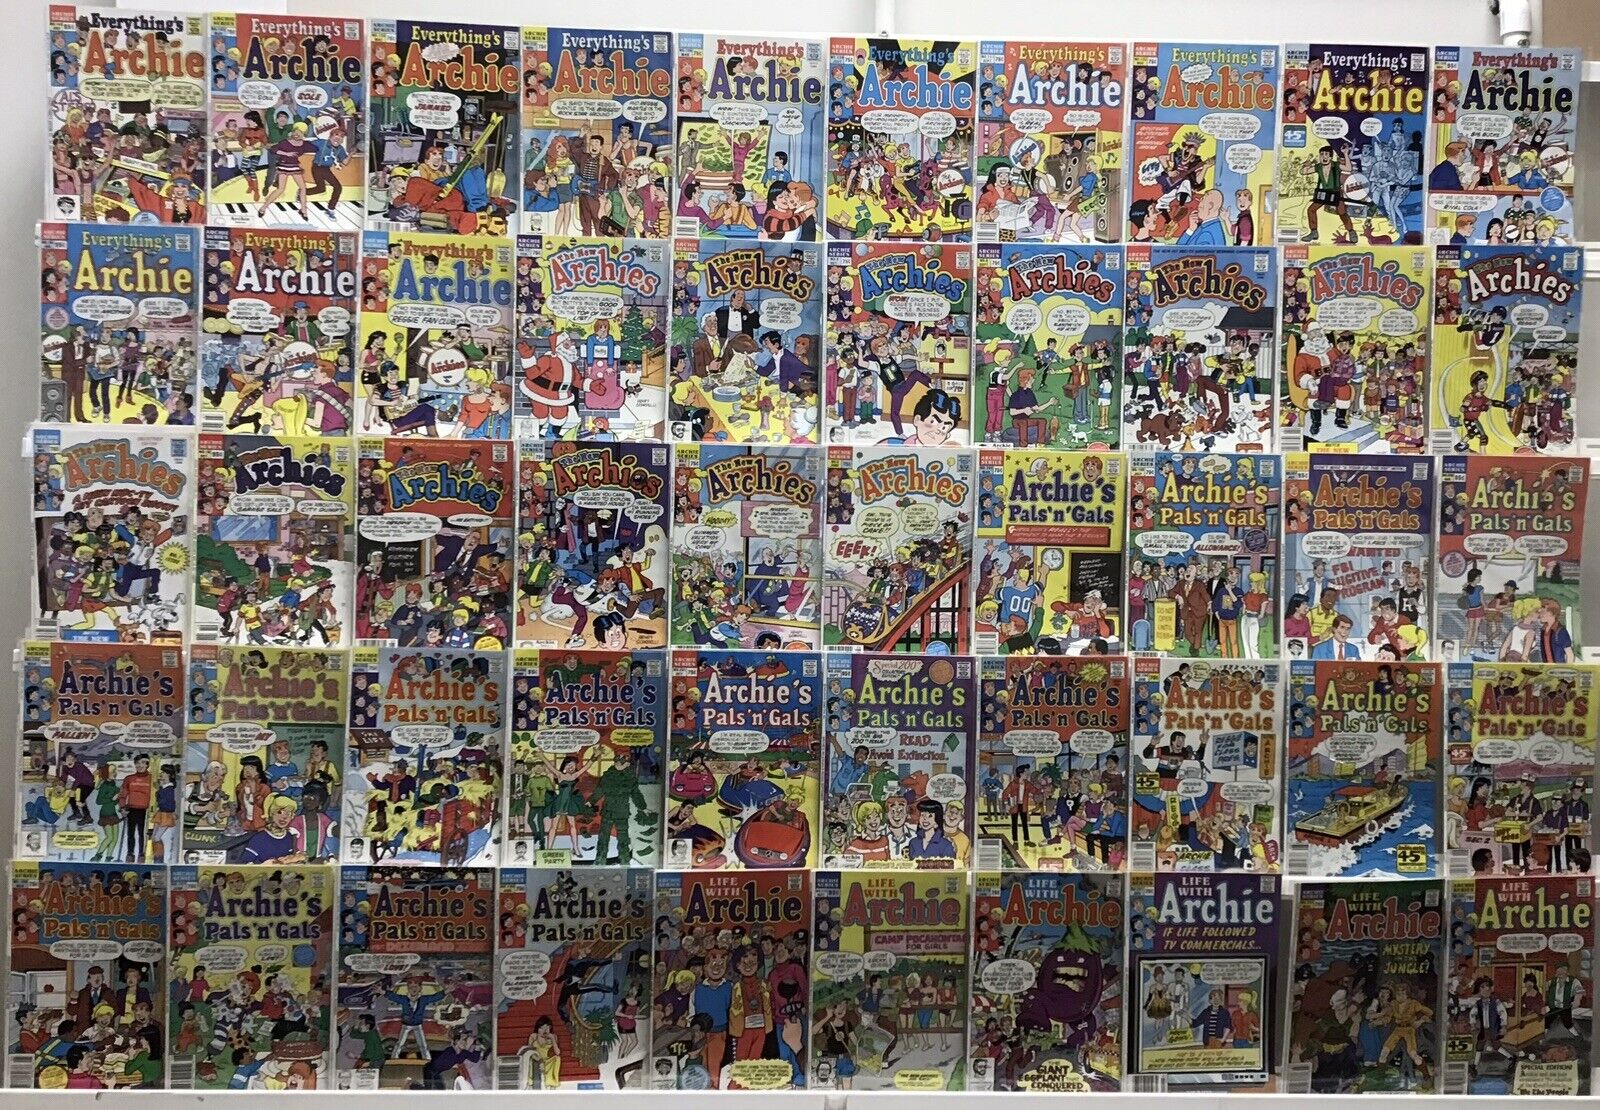 Archie Comics - The New Archie, Archie Pal’s & Gal’s - Comic Book Lot Of 50